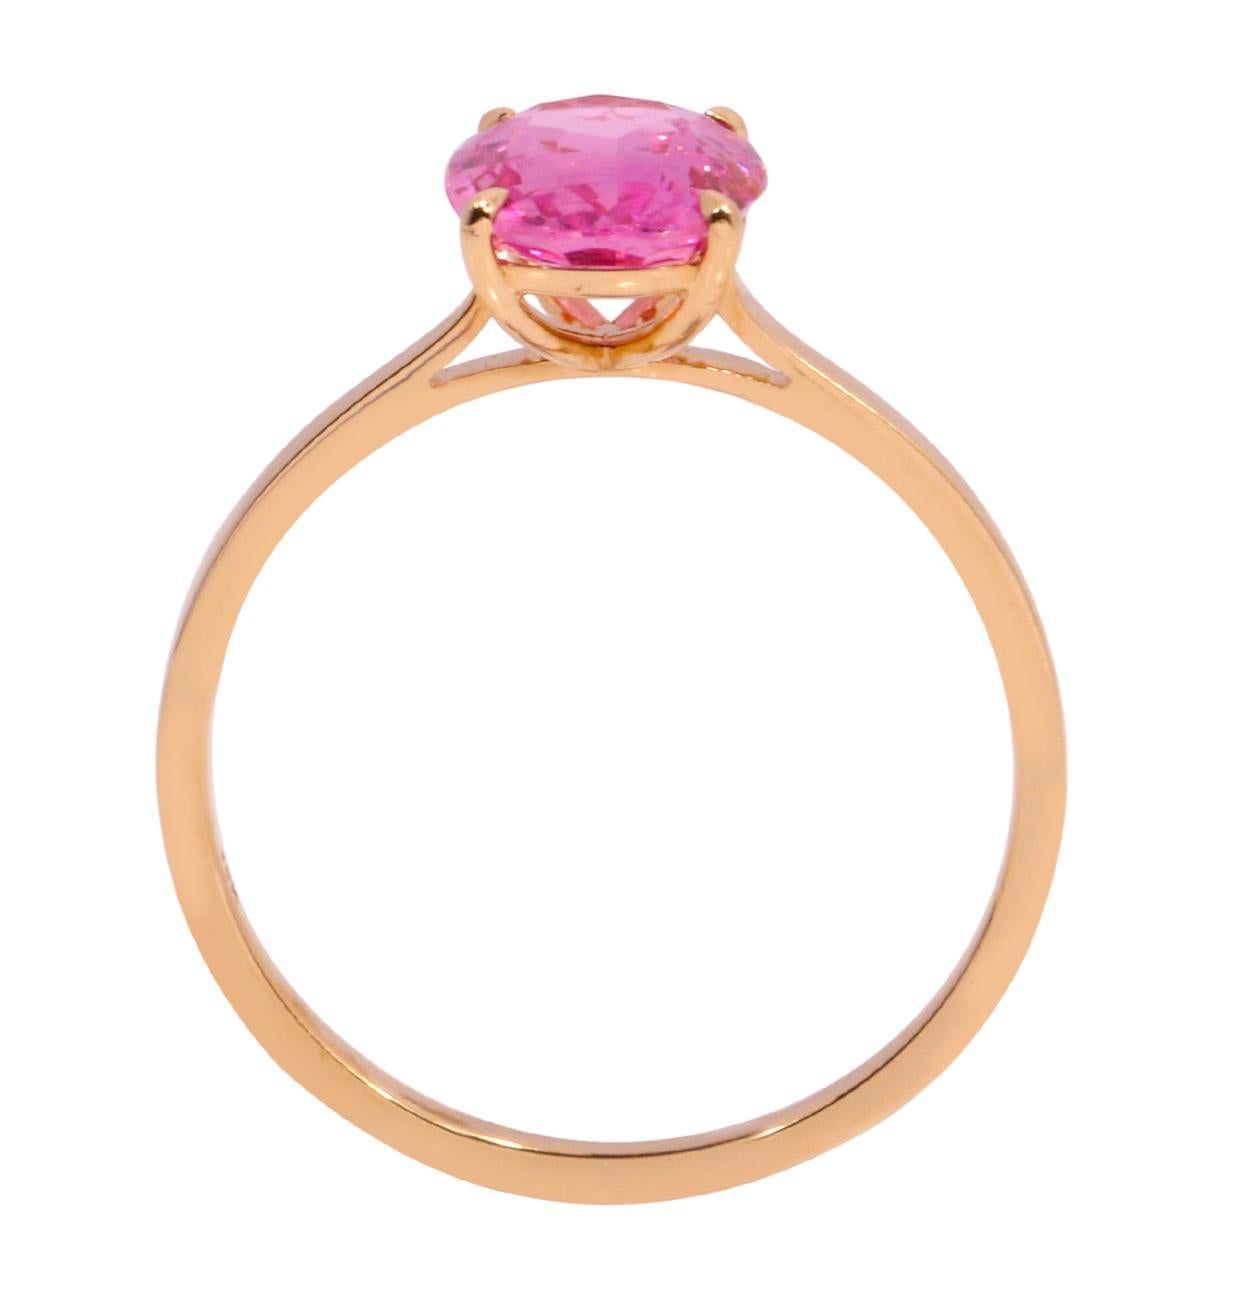 Women's 18 Karat Rose Gold 1.96 Carats Pink Sapphire Oval-Cut Ring in Prong Setting For Sale